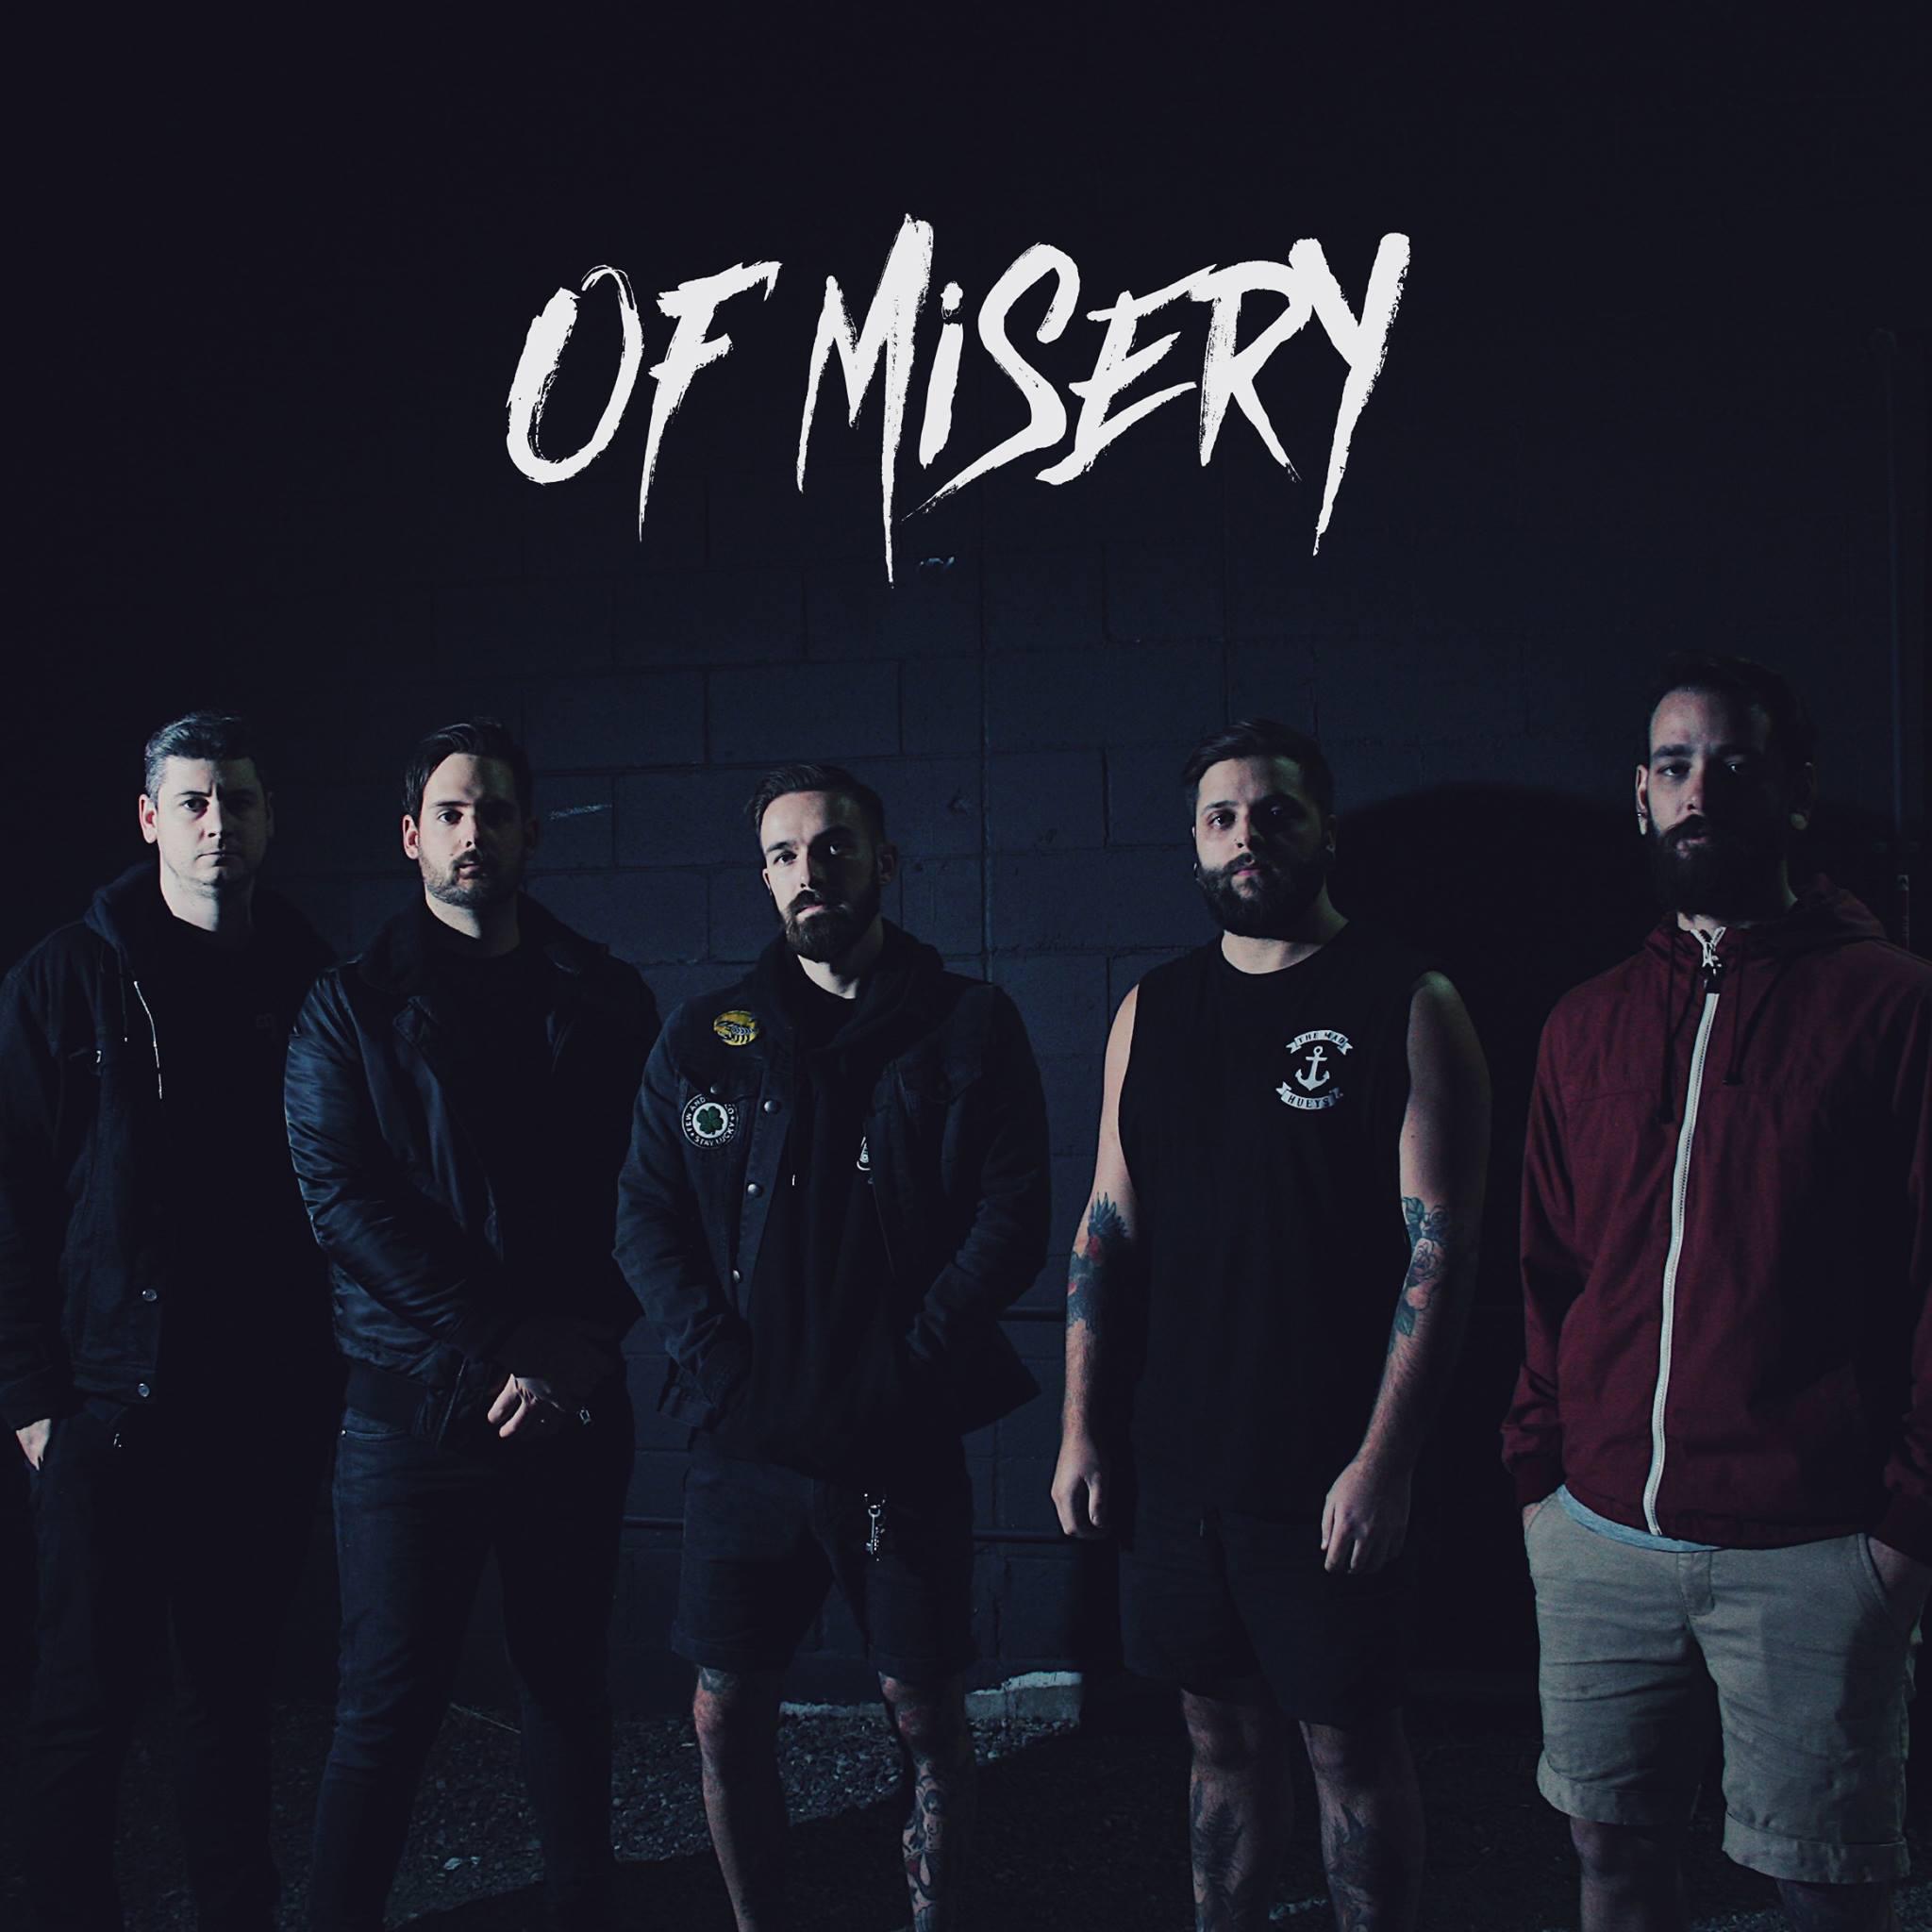 Of Misery